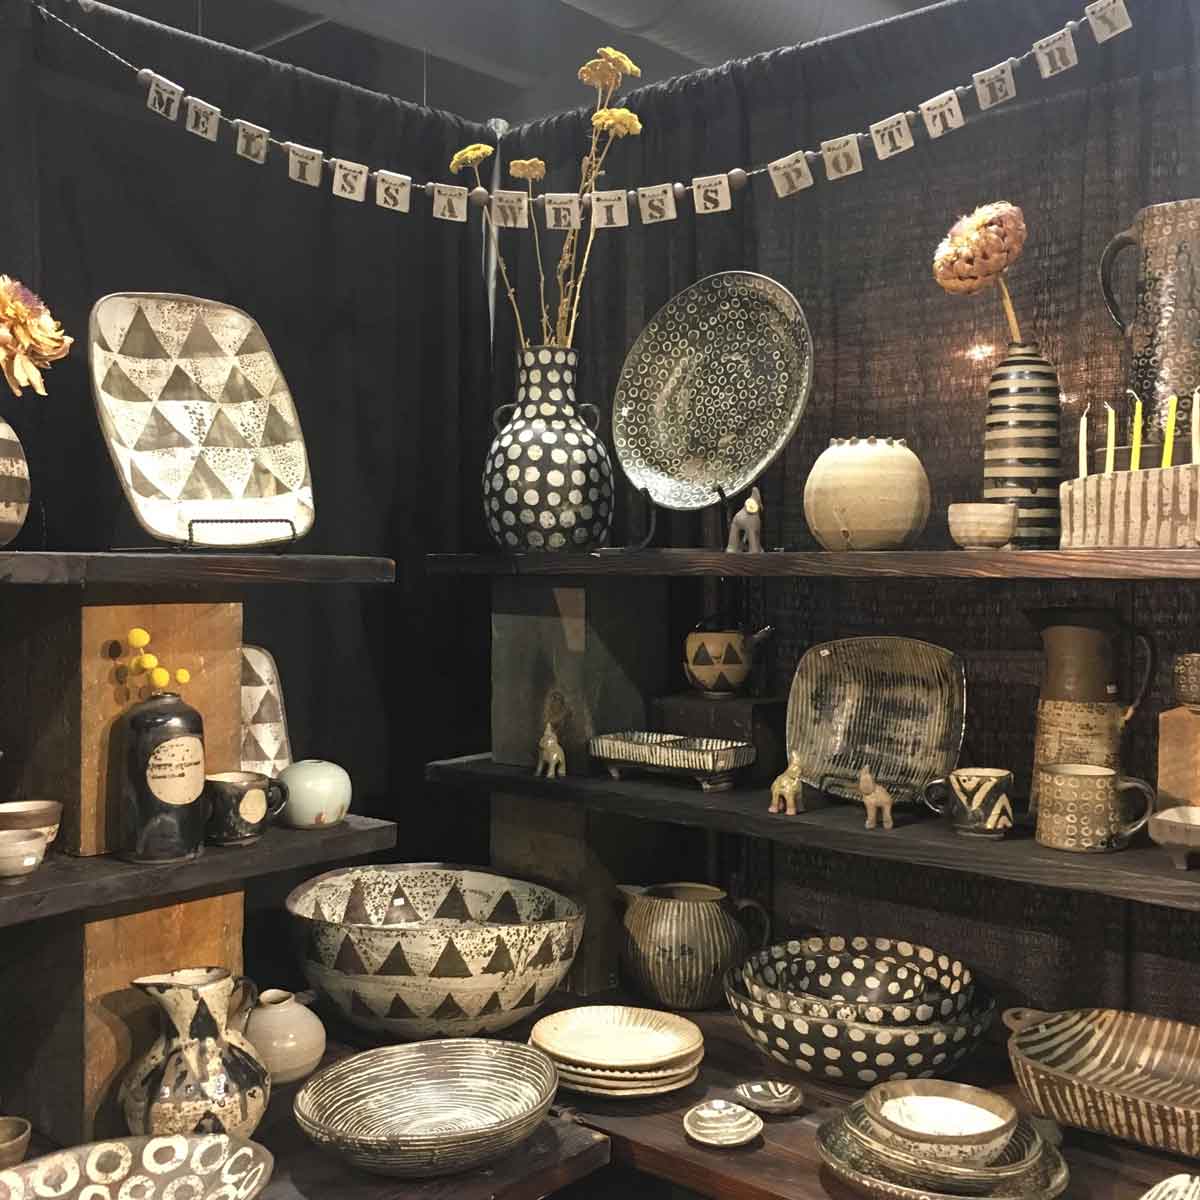 Melissa Weiss display booth, 2018.